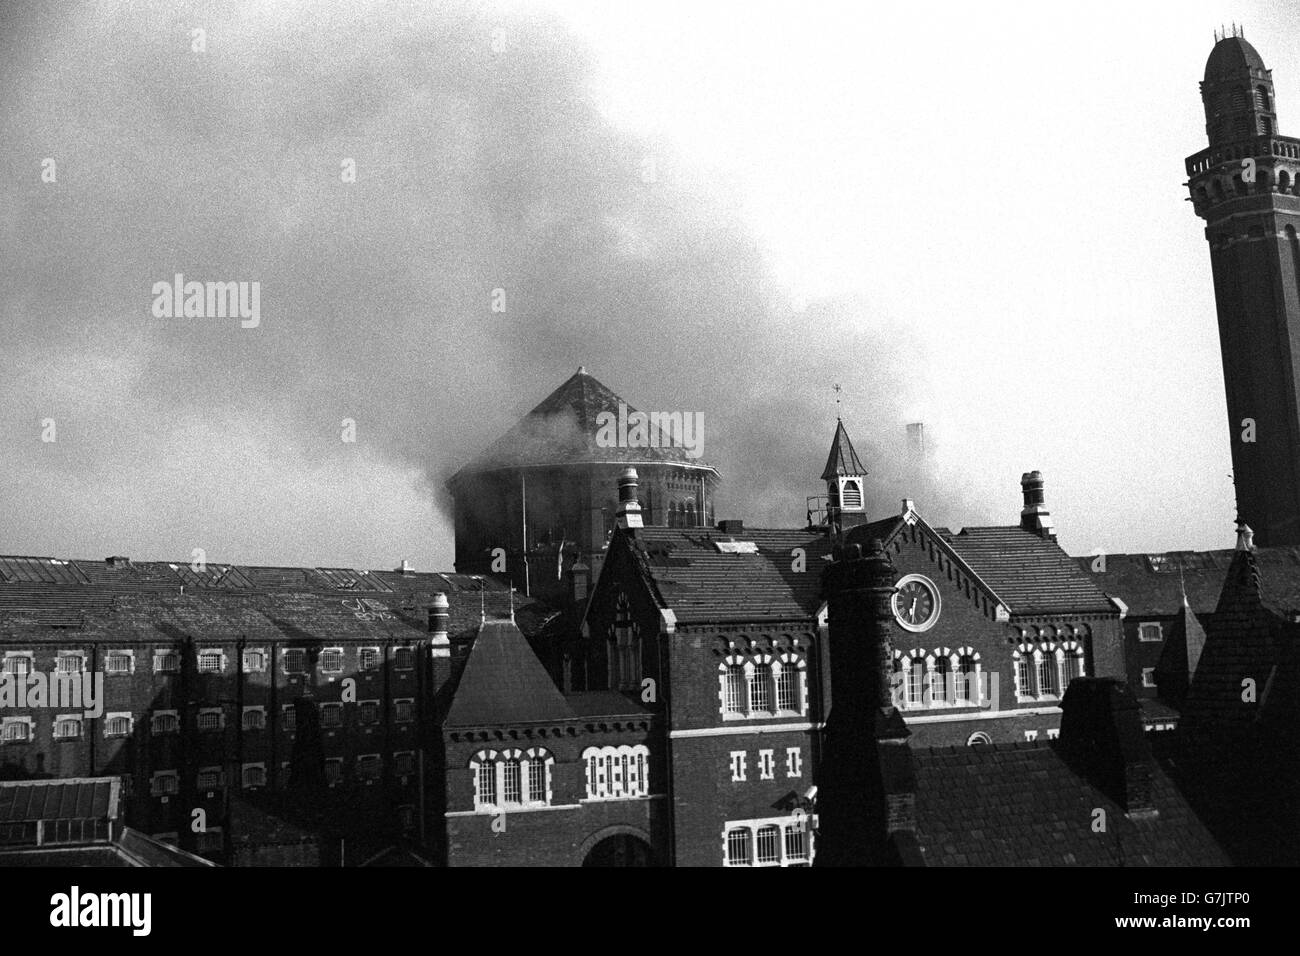 Smoke billows from the roof of Strangeways prison in Manchester after inmates set fire to debris piled inside. Stock Photo